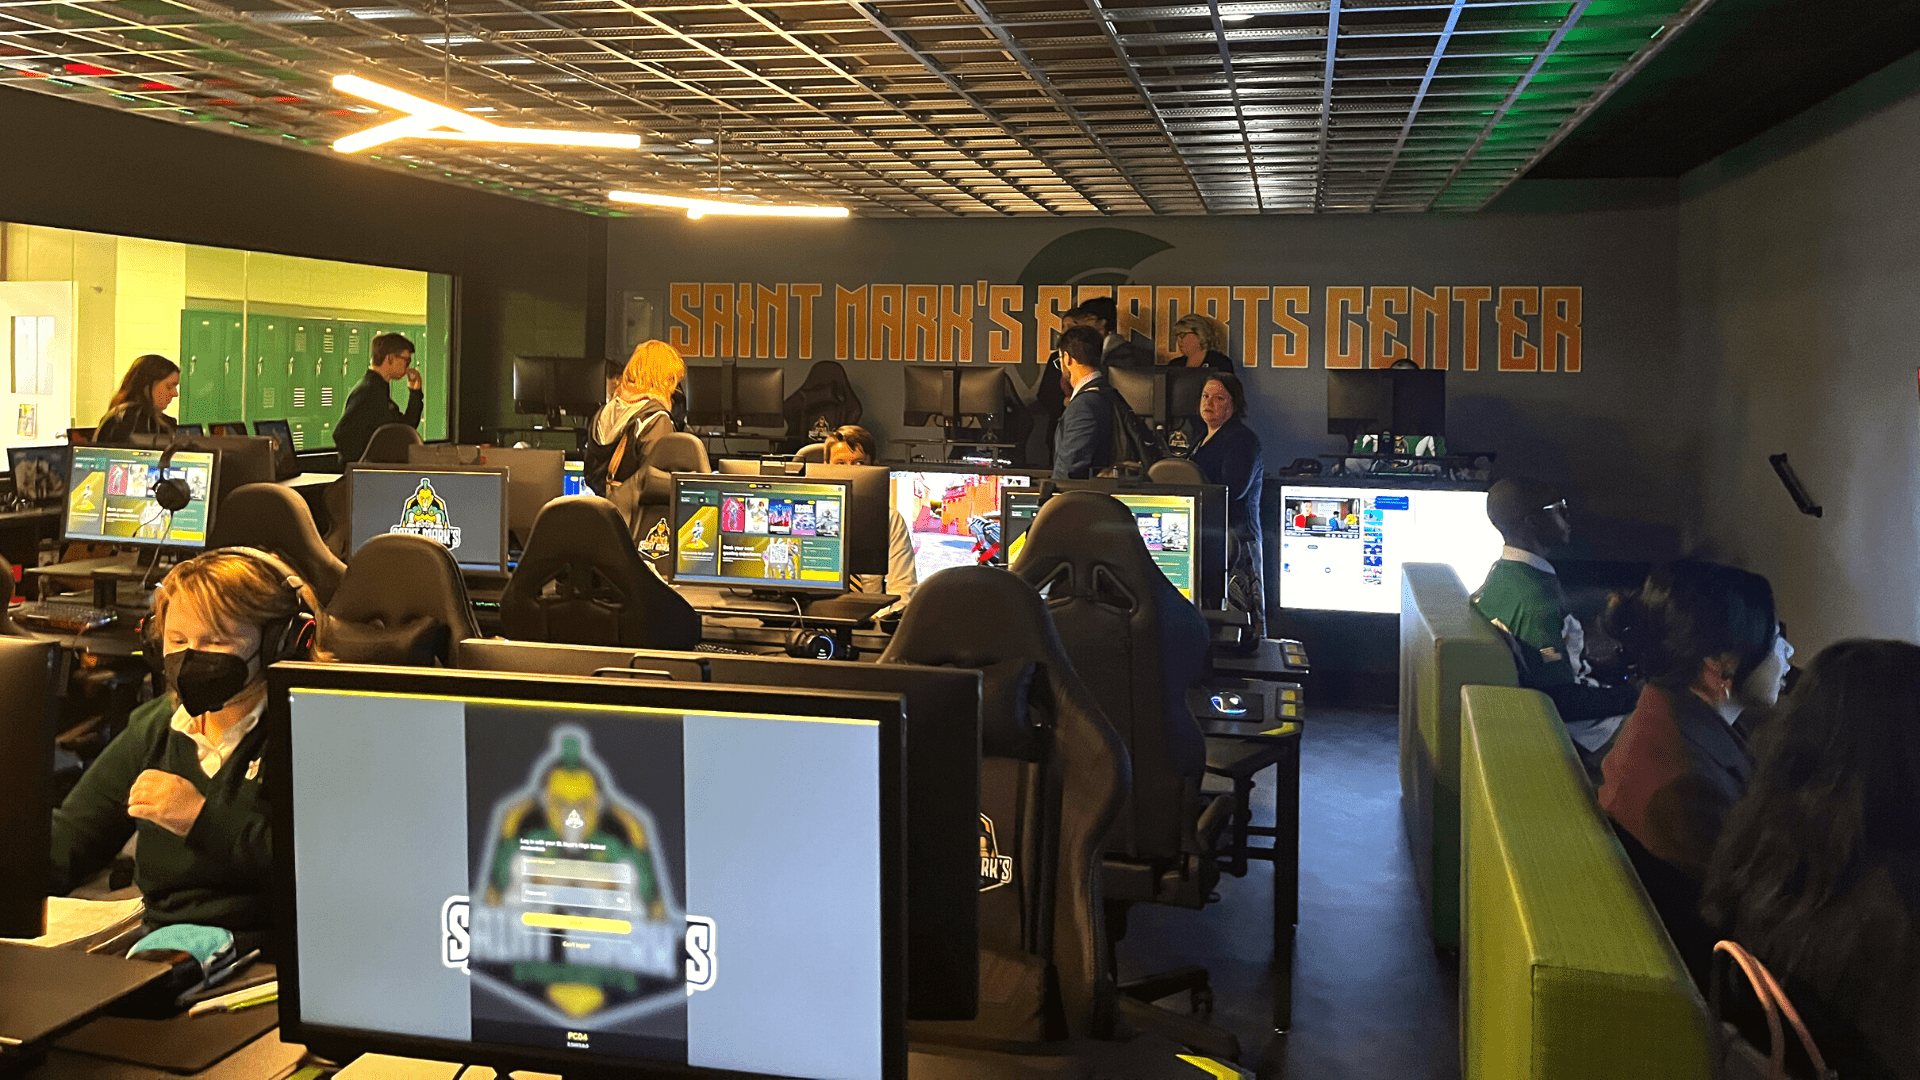 Featured image for “The future is now at Saint Mark’s High School Esports Center”